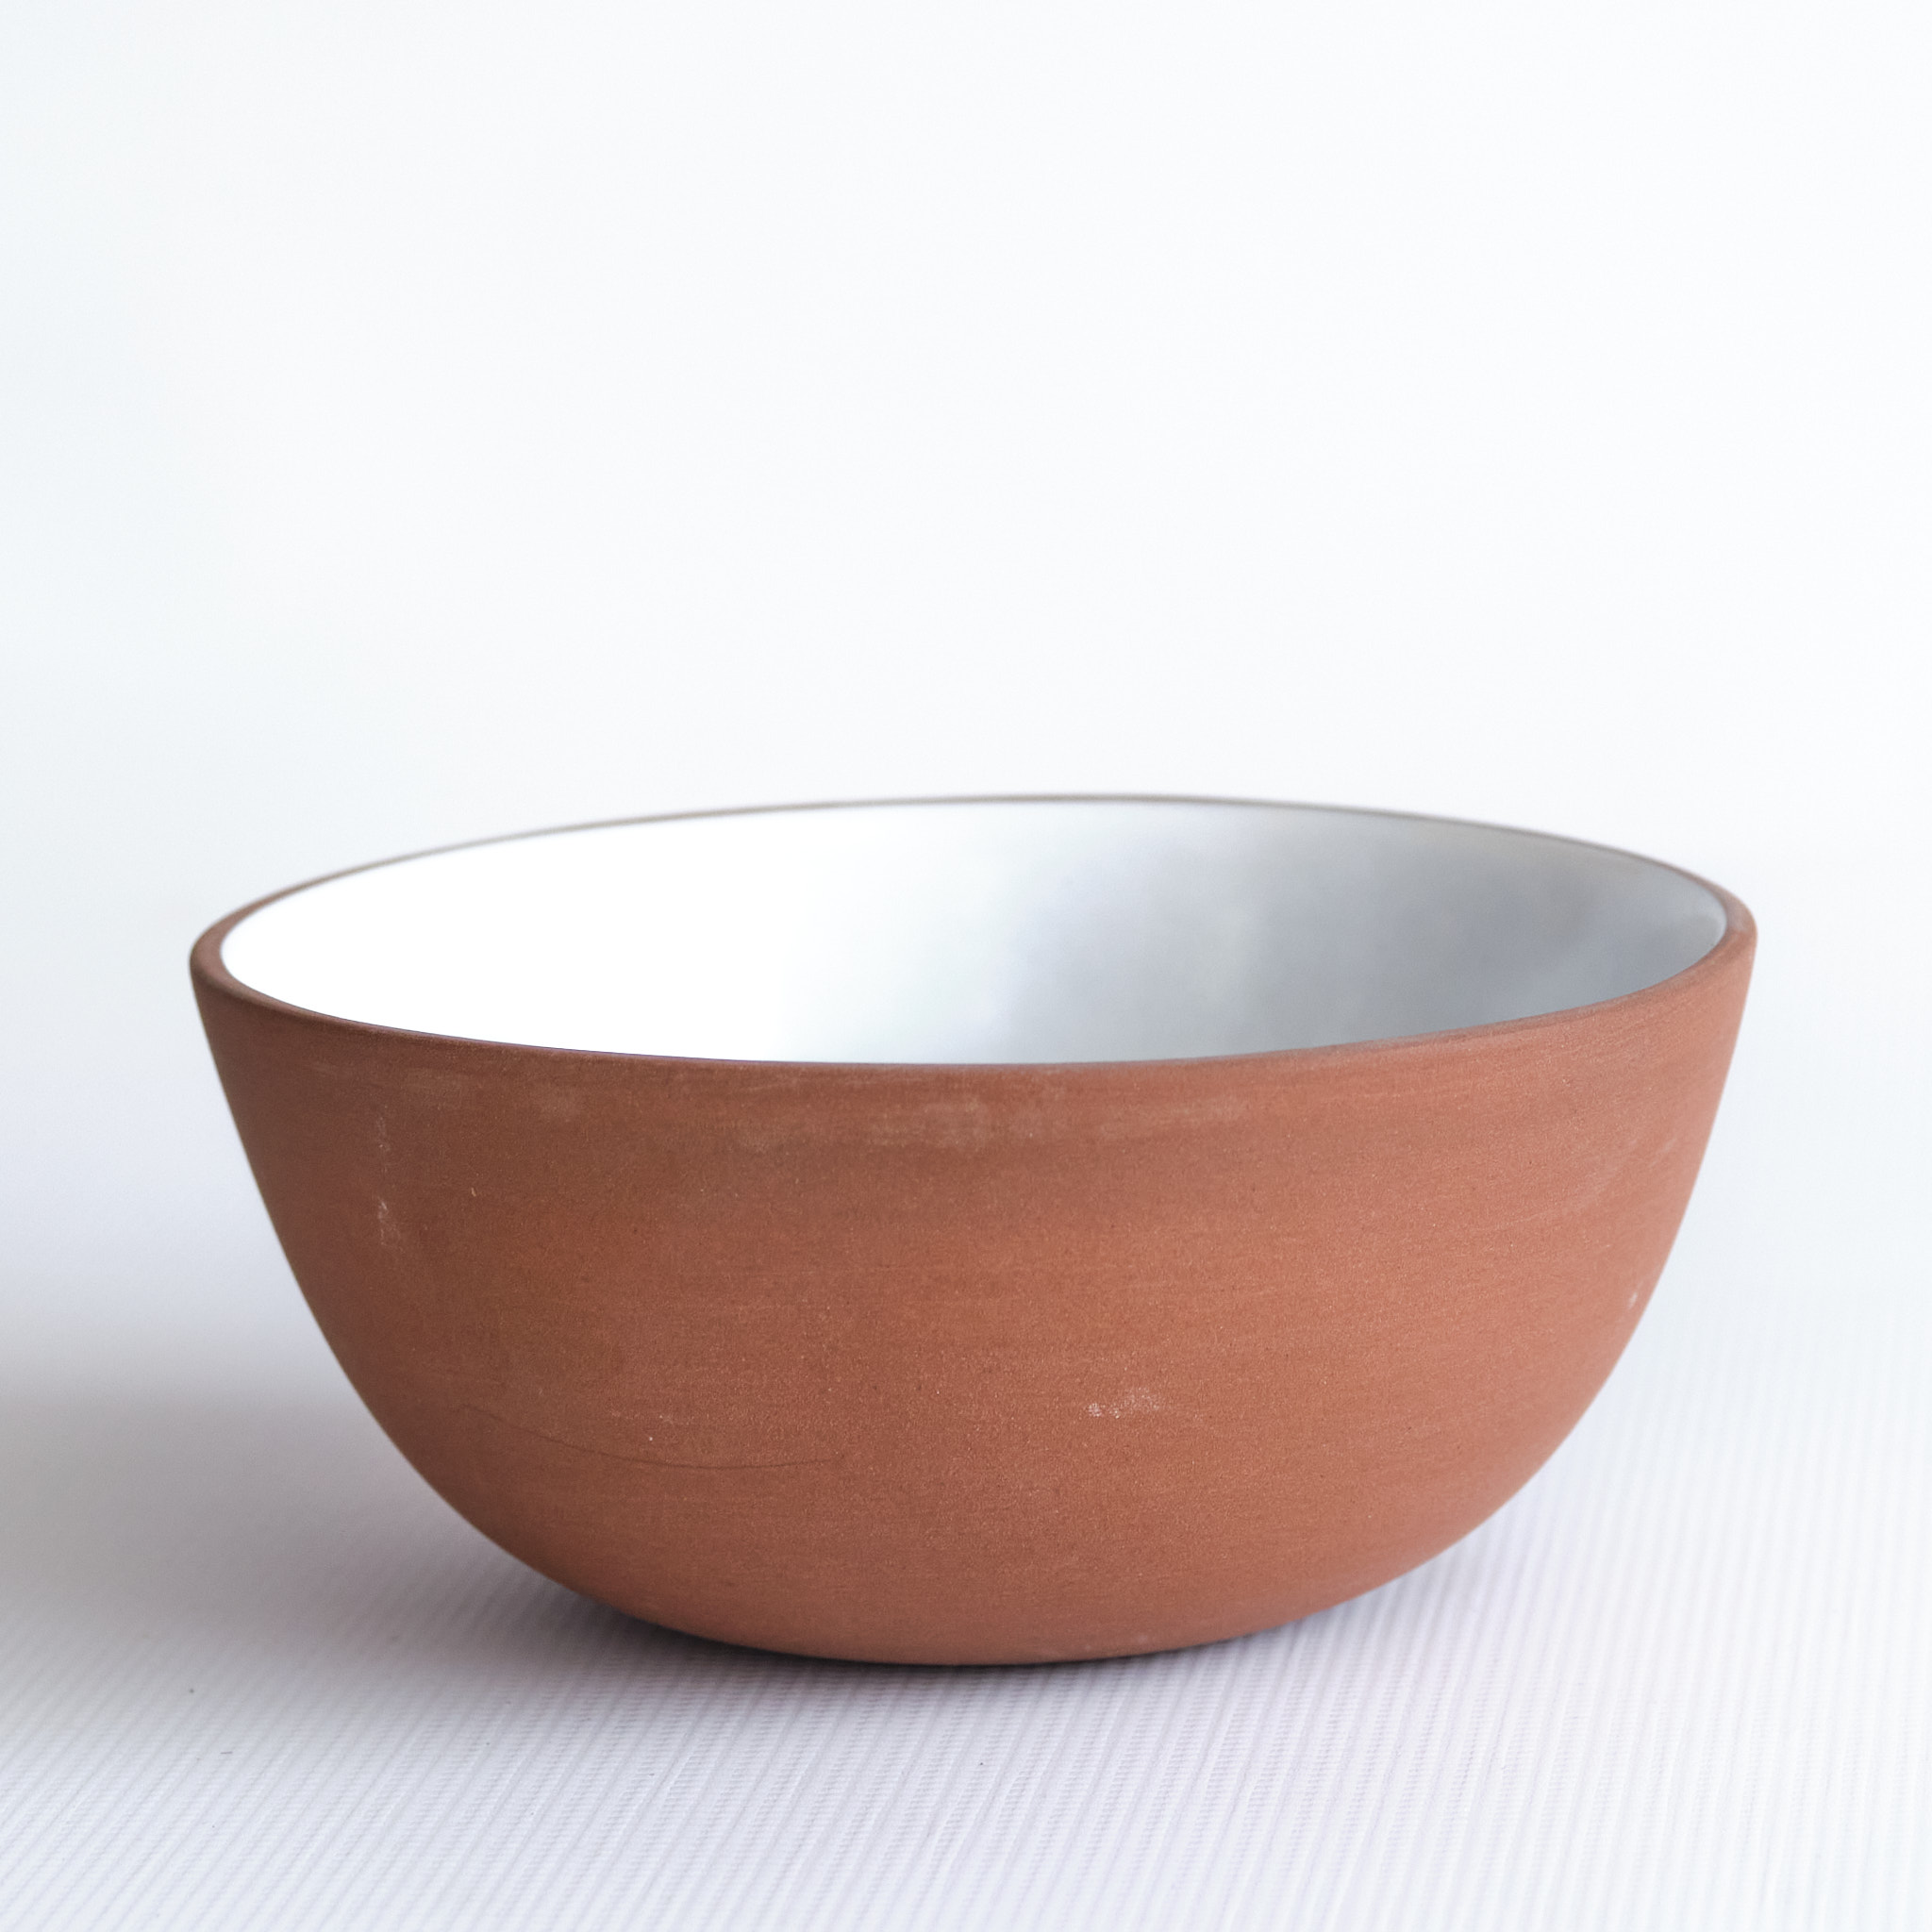 garden-trading-red-and-white-stoneware-cereal-bowl